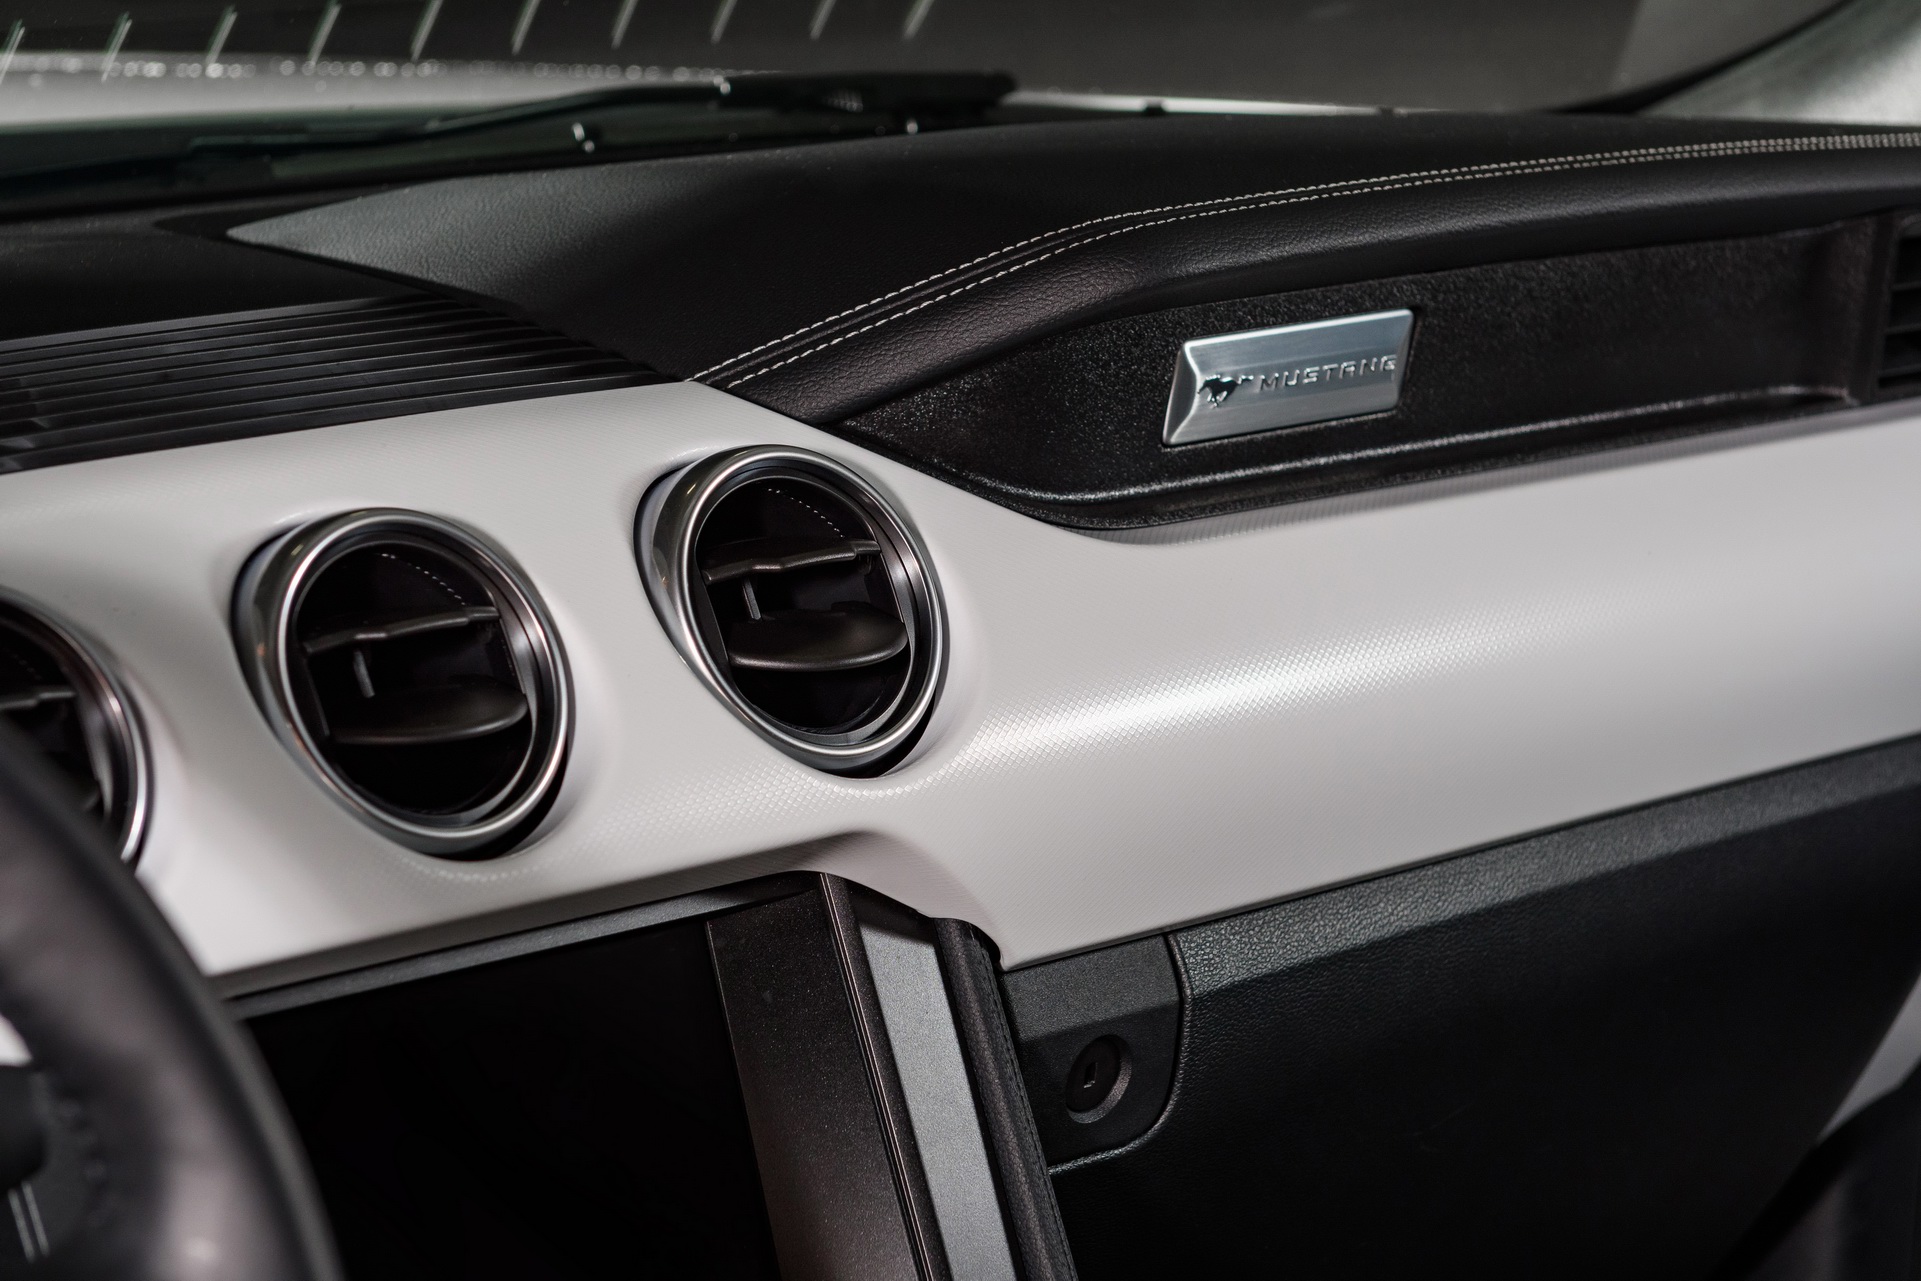 2022 Ford Mustang Ice White Appearance Package Interior Detail Wallpapers #18 of 24